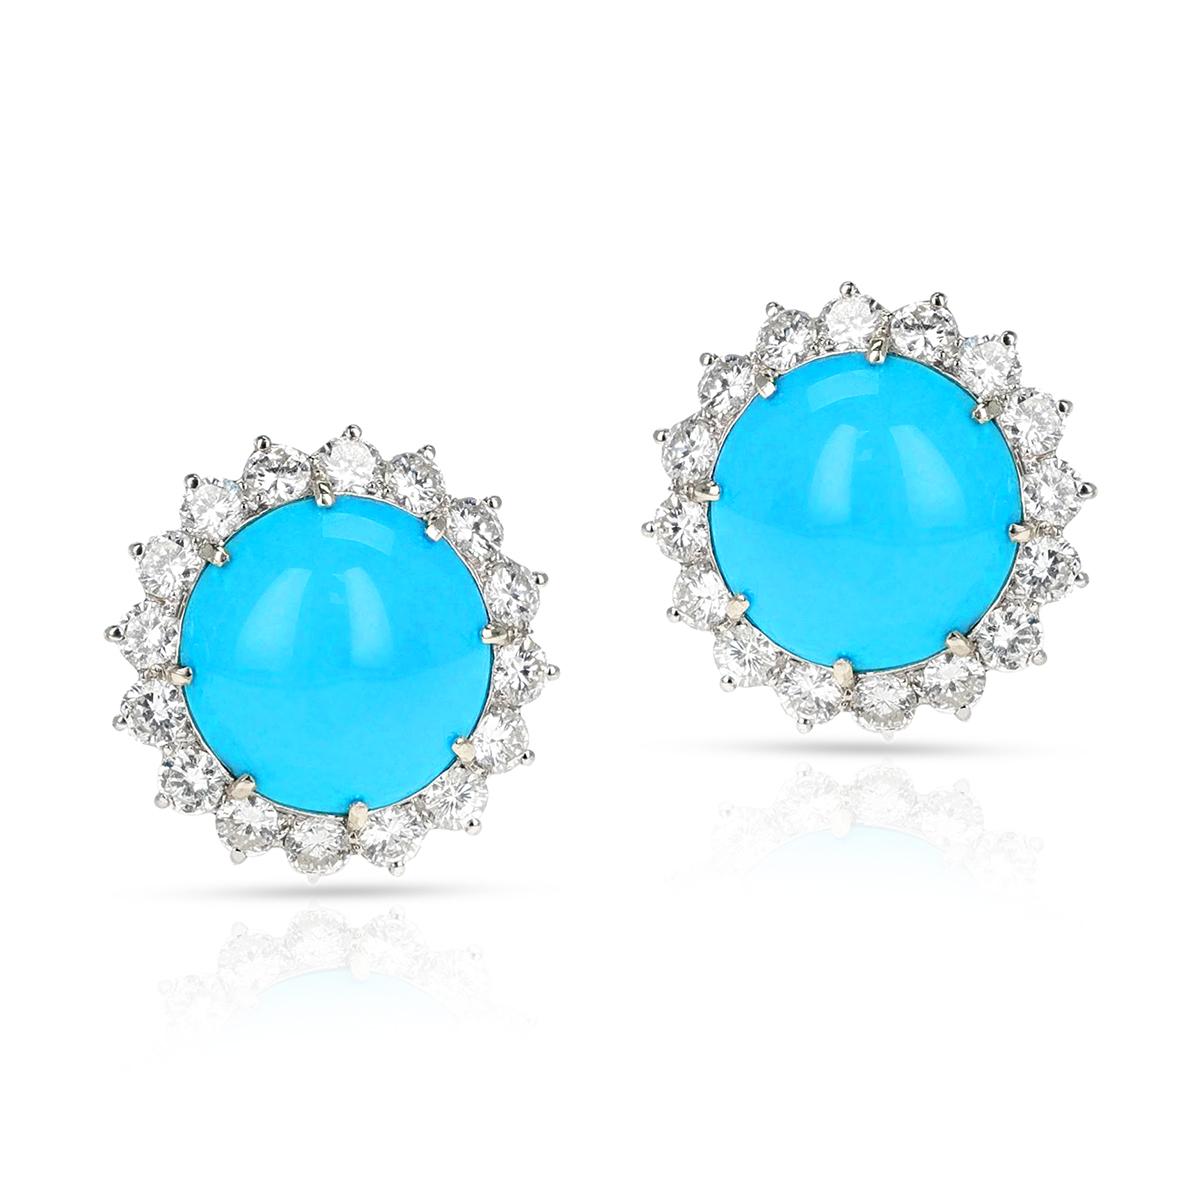 A pair of GIA Certified Natural Round Turquoise and Diamond Earrings made in 18k White Gold. The total diamond weight is appx. 3 carats. The total weight of the earrings is 7.65 grams. The length is 0.60 inches. 